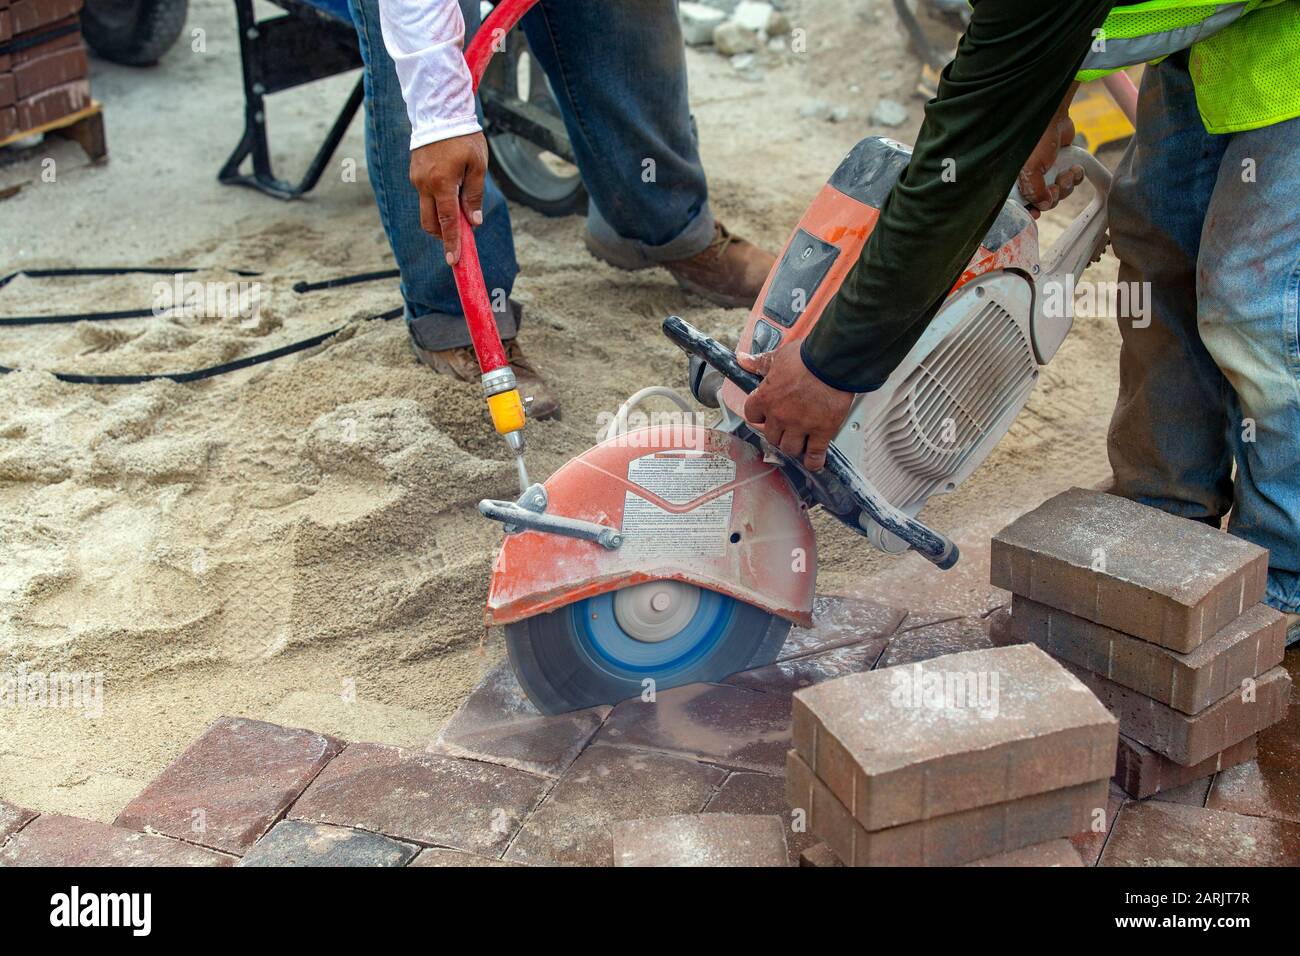 man, laborer cutting and sawing paving bricks in a straight line. Stock Photo